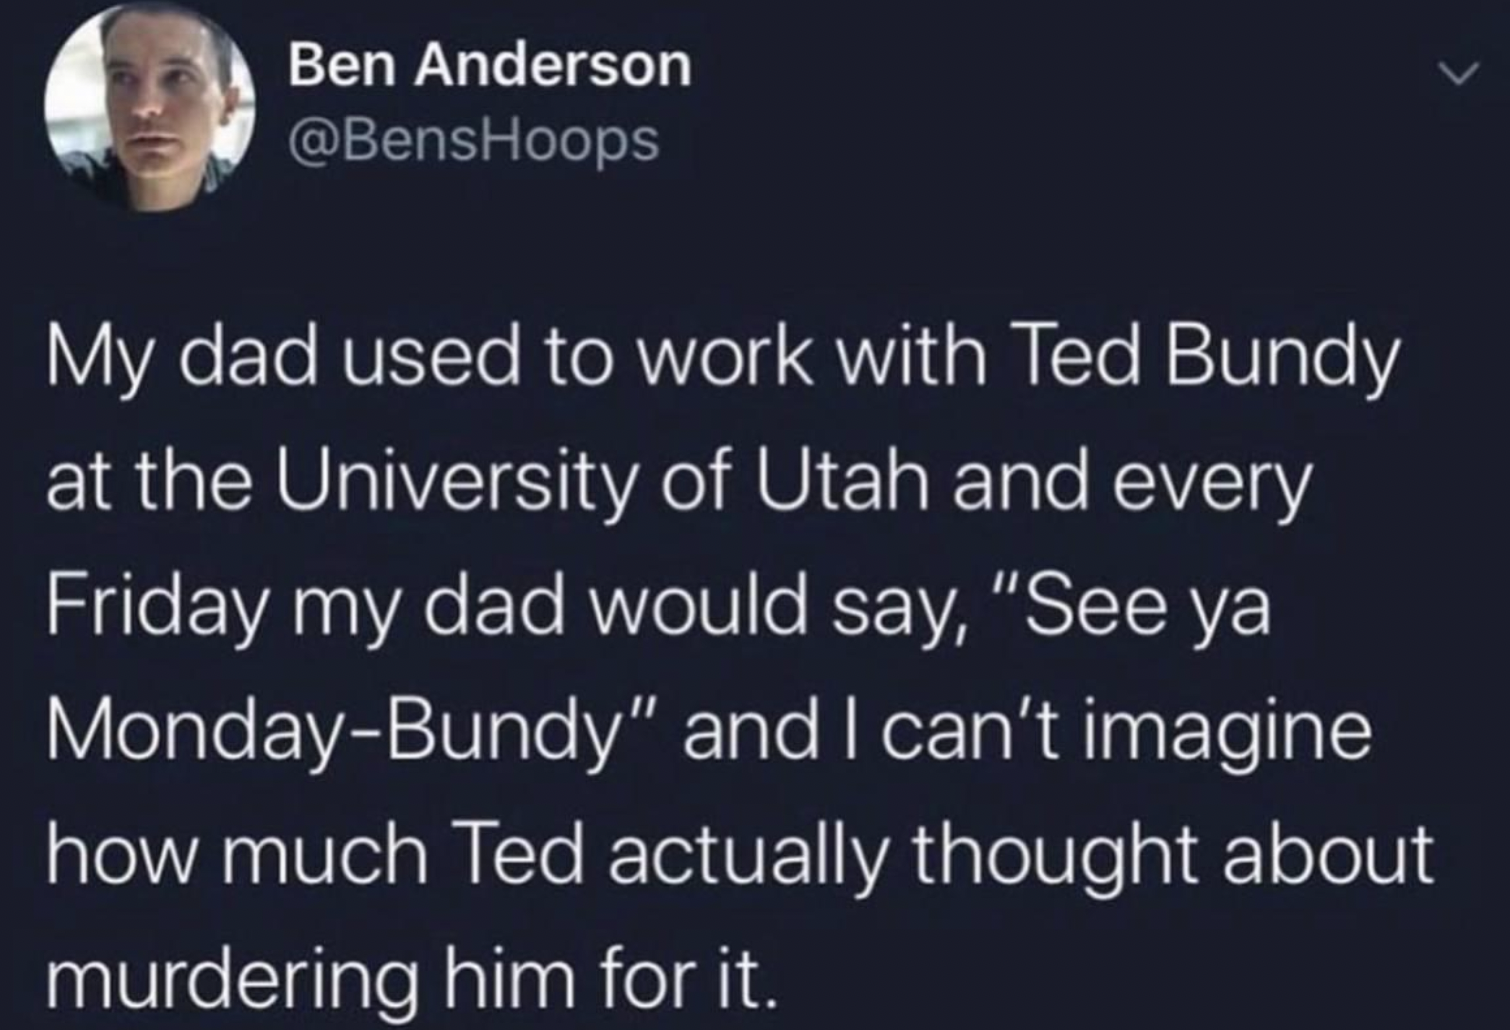 Ted Bundy - Ben Anderson My dad used to work with Ted Bundy at the University of Utah and every Friday my dad would say, "See ya MondayBundy" and I can't imagine how much Ted actually thought about murdering him for it.